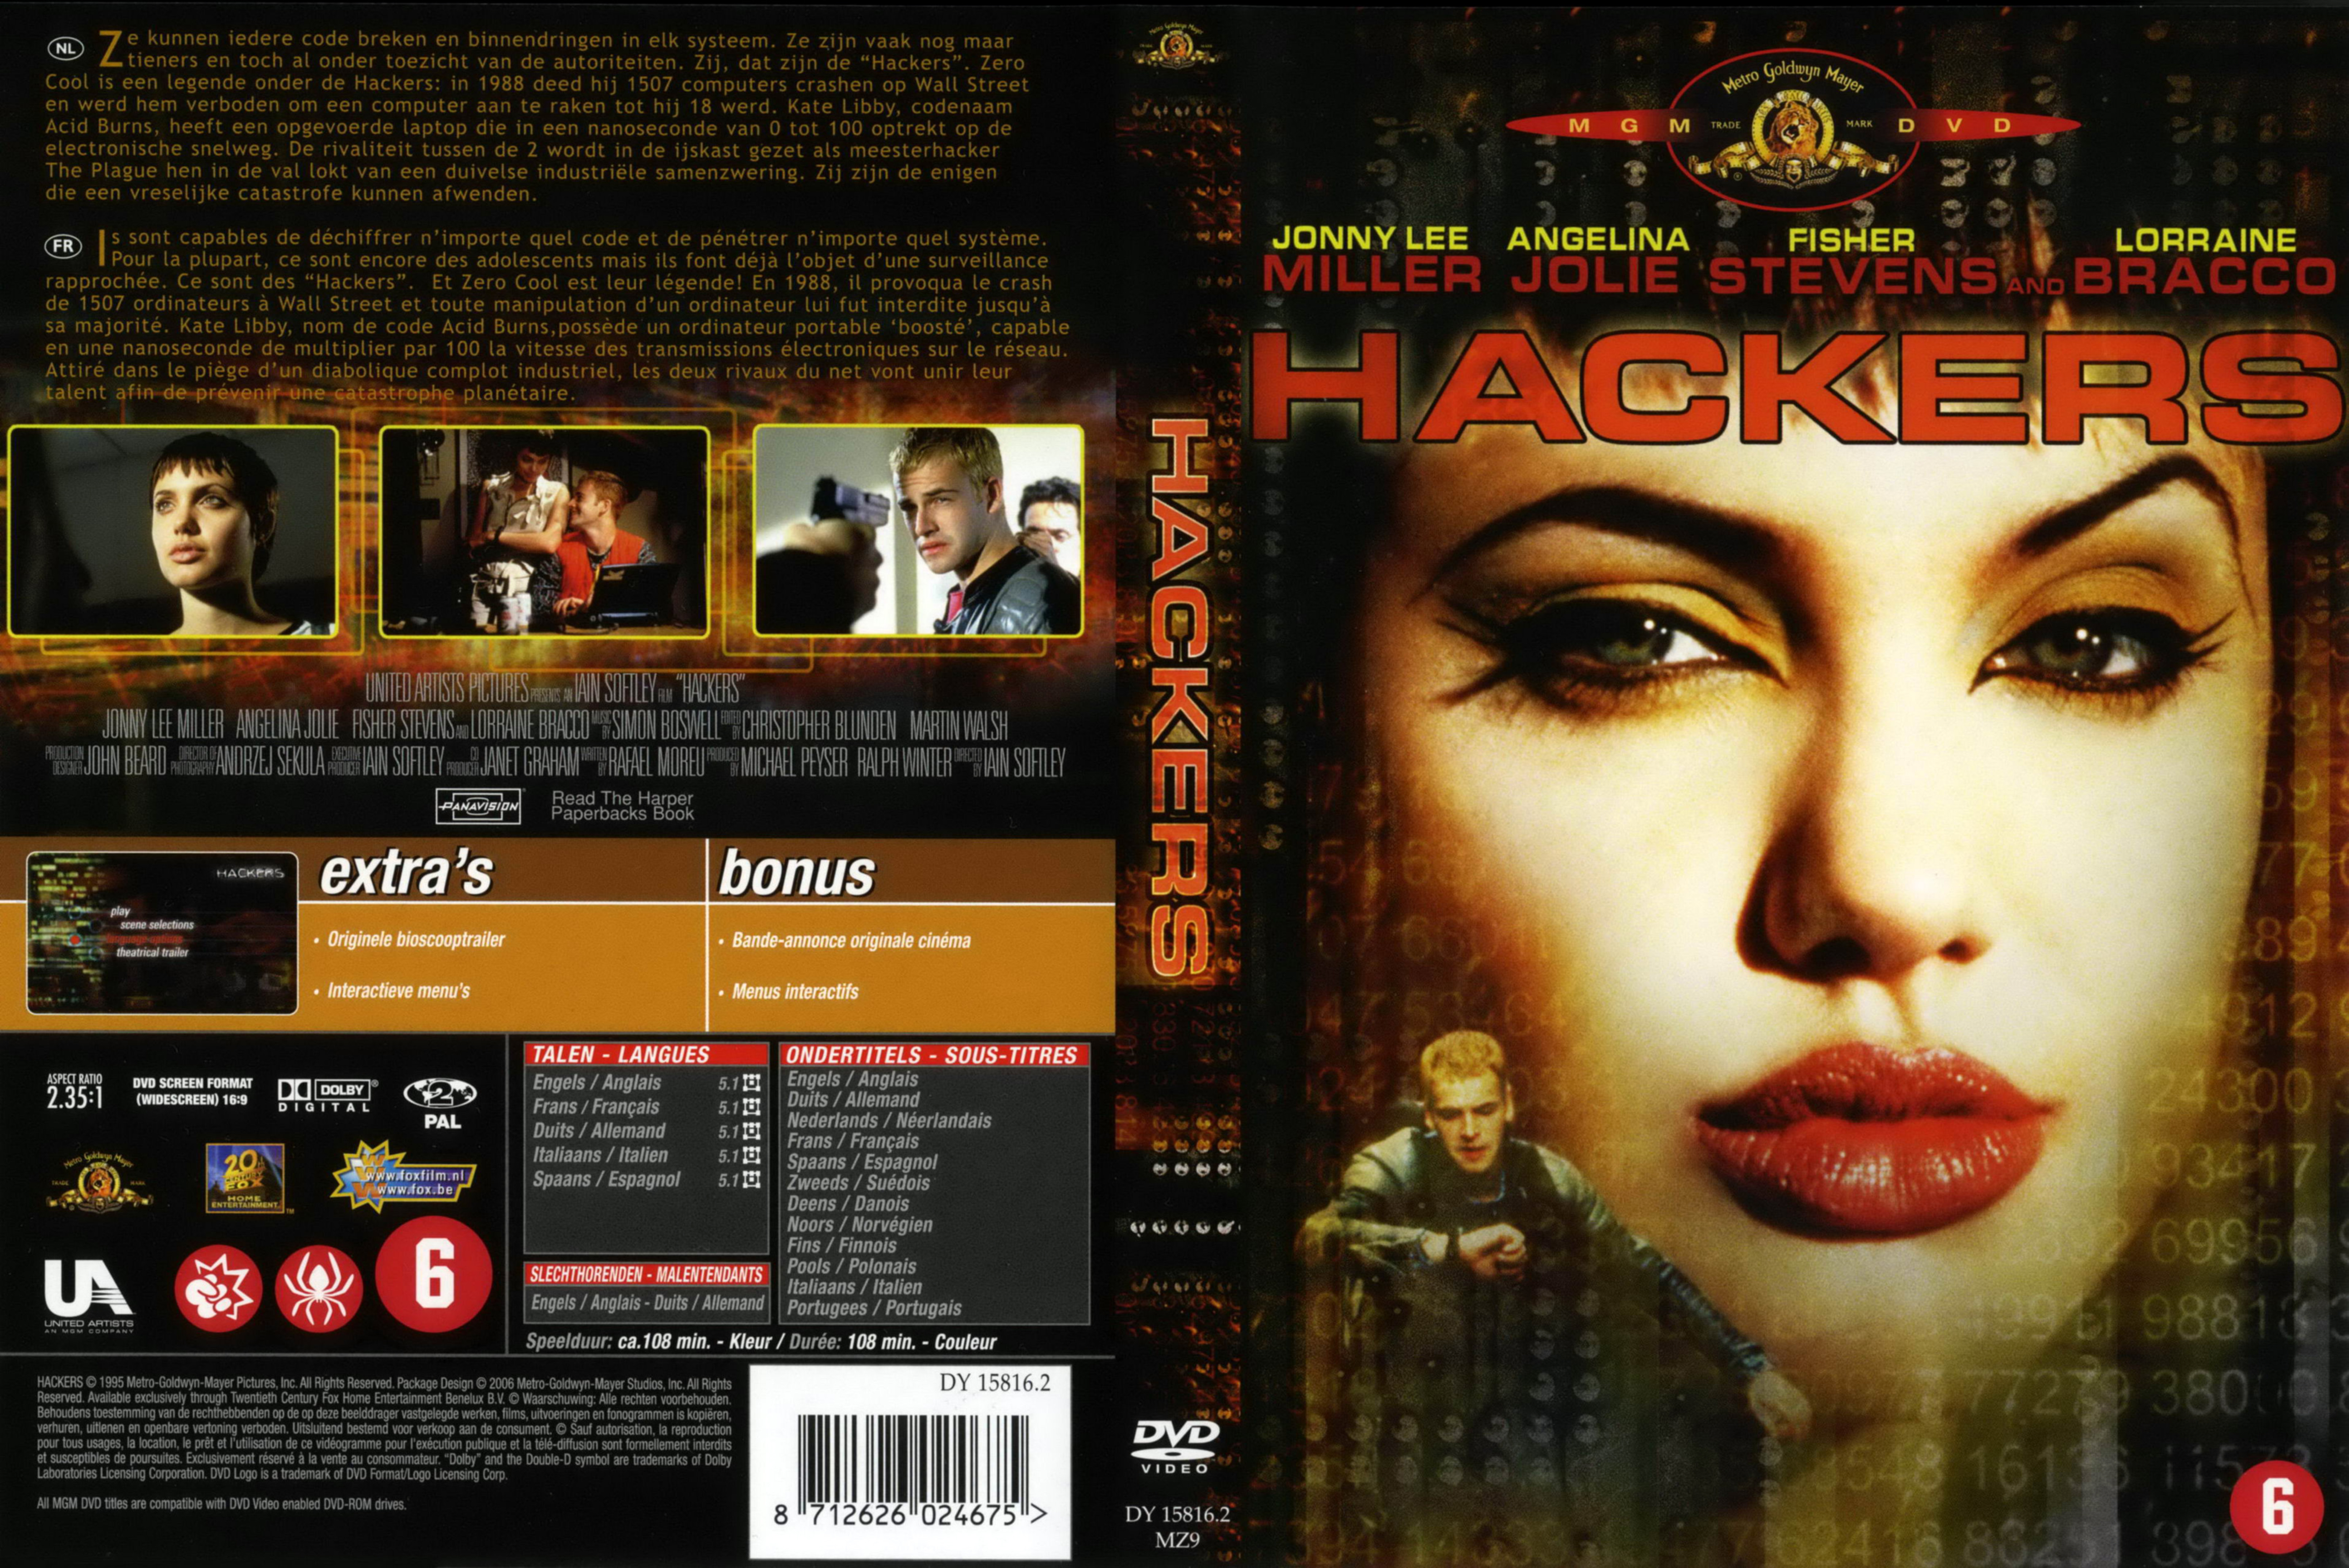 Jaquette DVD Hackers v2